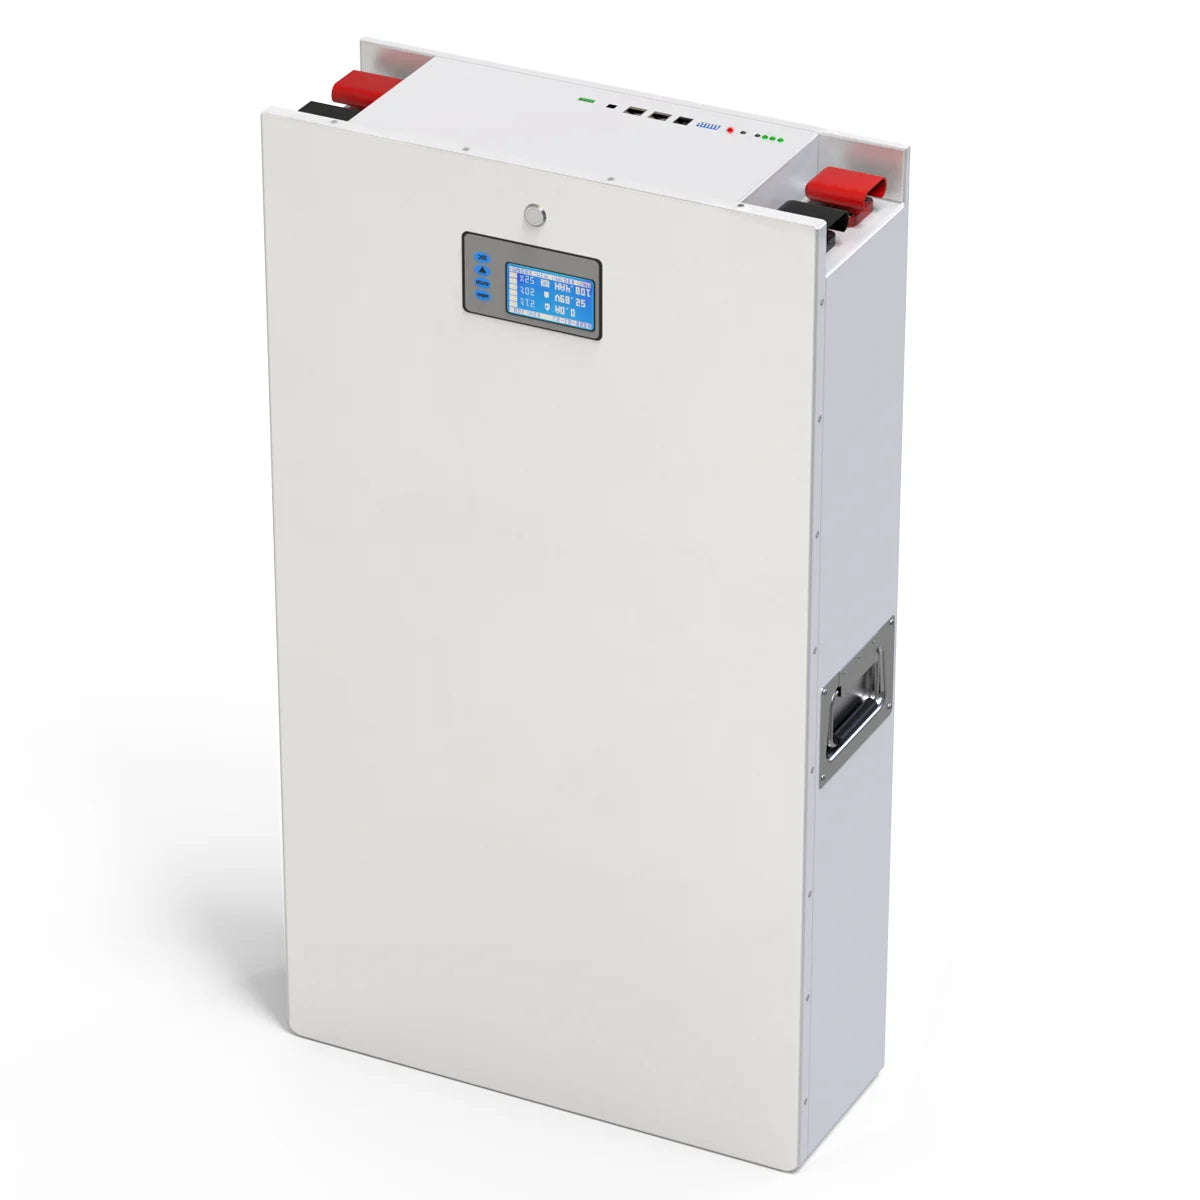 LiFePO4 48V 200AH Powerwall Battery, 48V 200AH Powerwall LiFePO4 Battery Pack specifications, including weight, voltage, and capacity.